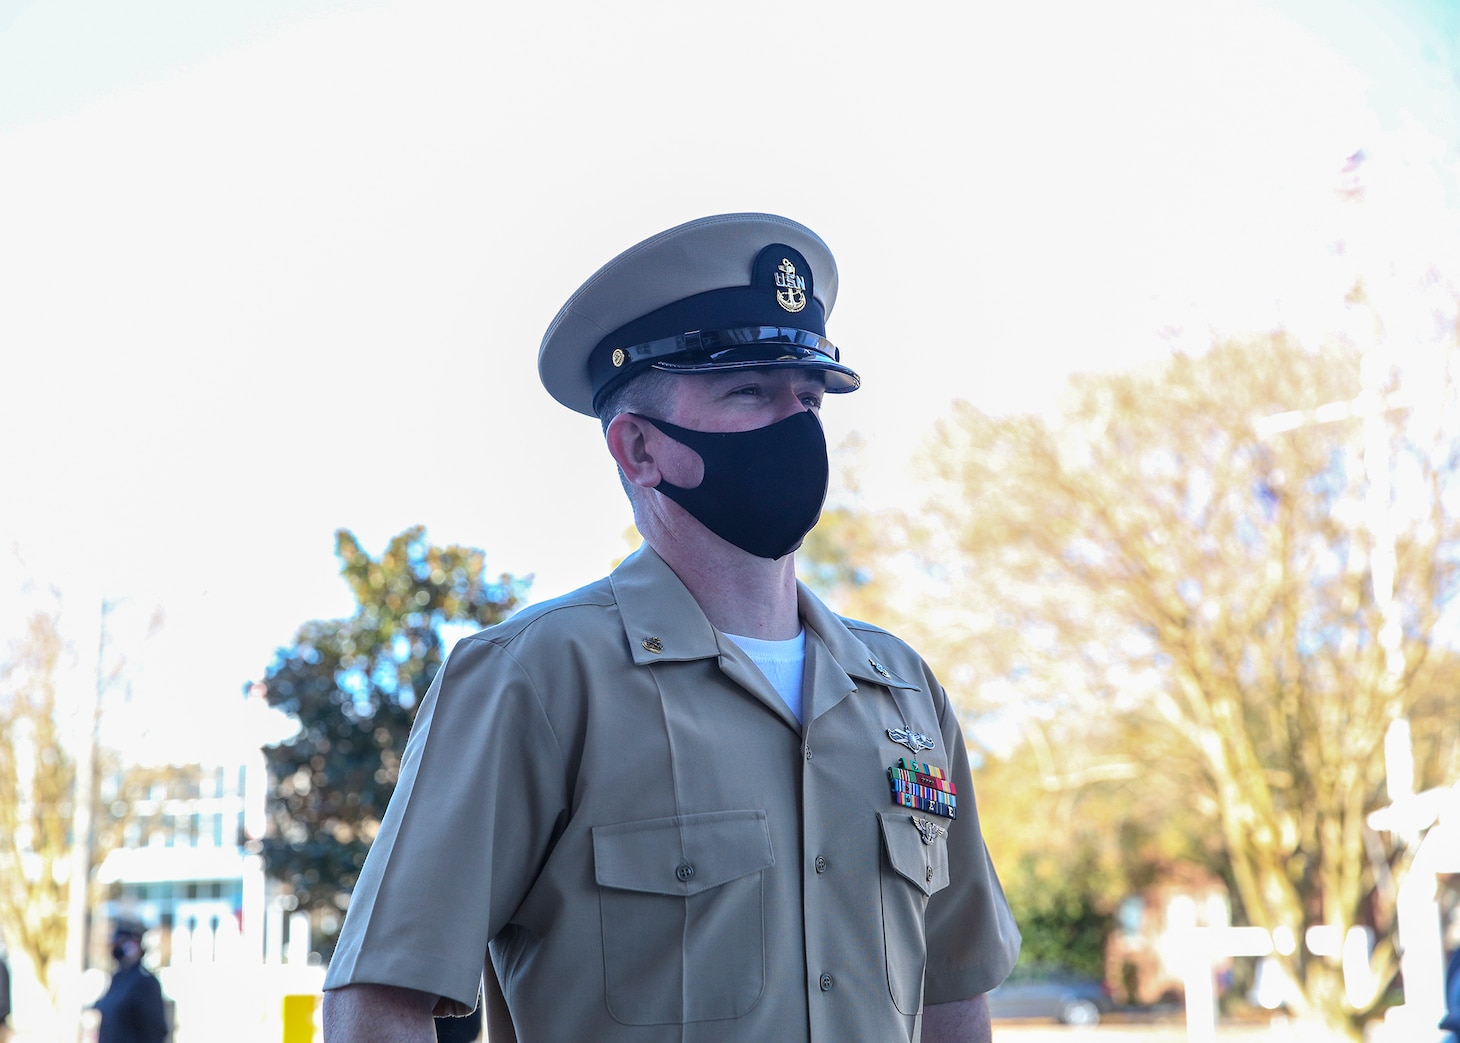 hief Aviation Aerographer’s Mate Travis Strait, assigned to U.S. Fleet Forces Command (USFFC), stands at the position of attention after his advancement during a chief petty officer (CPO) pinning ceremony at the USFFC headquarters in Norfolk, Virginia.